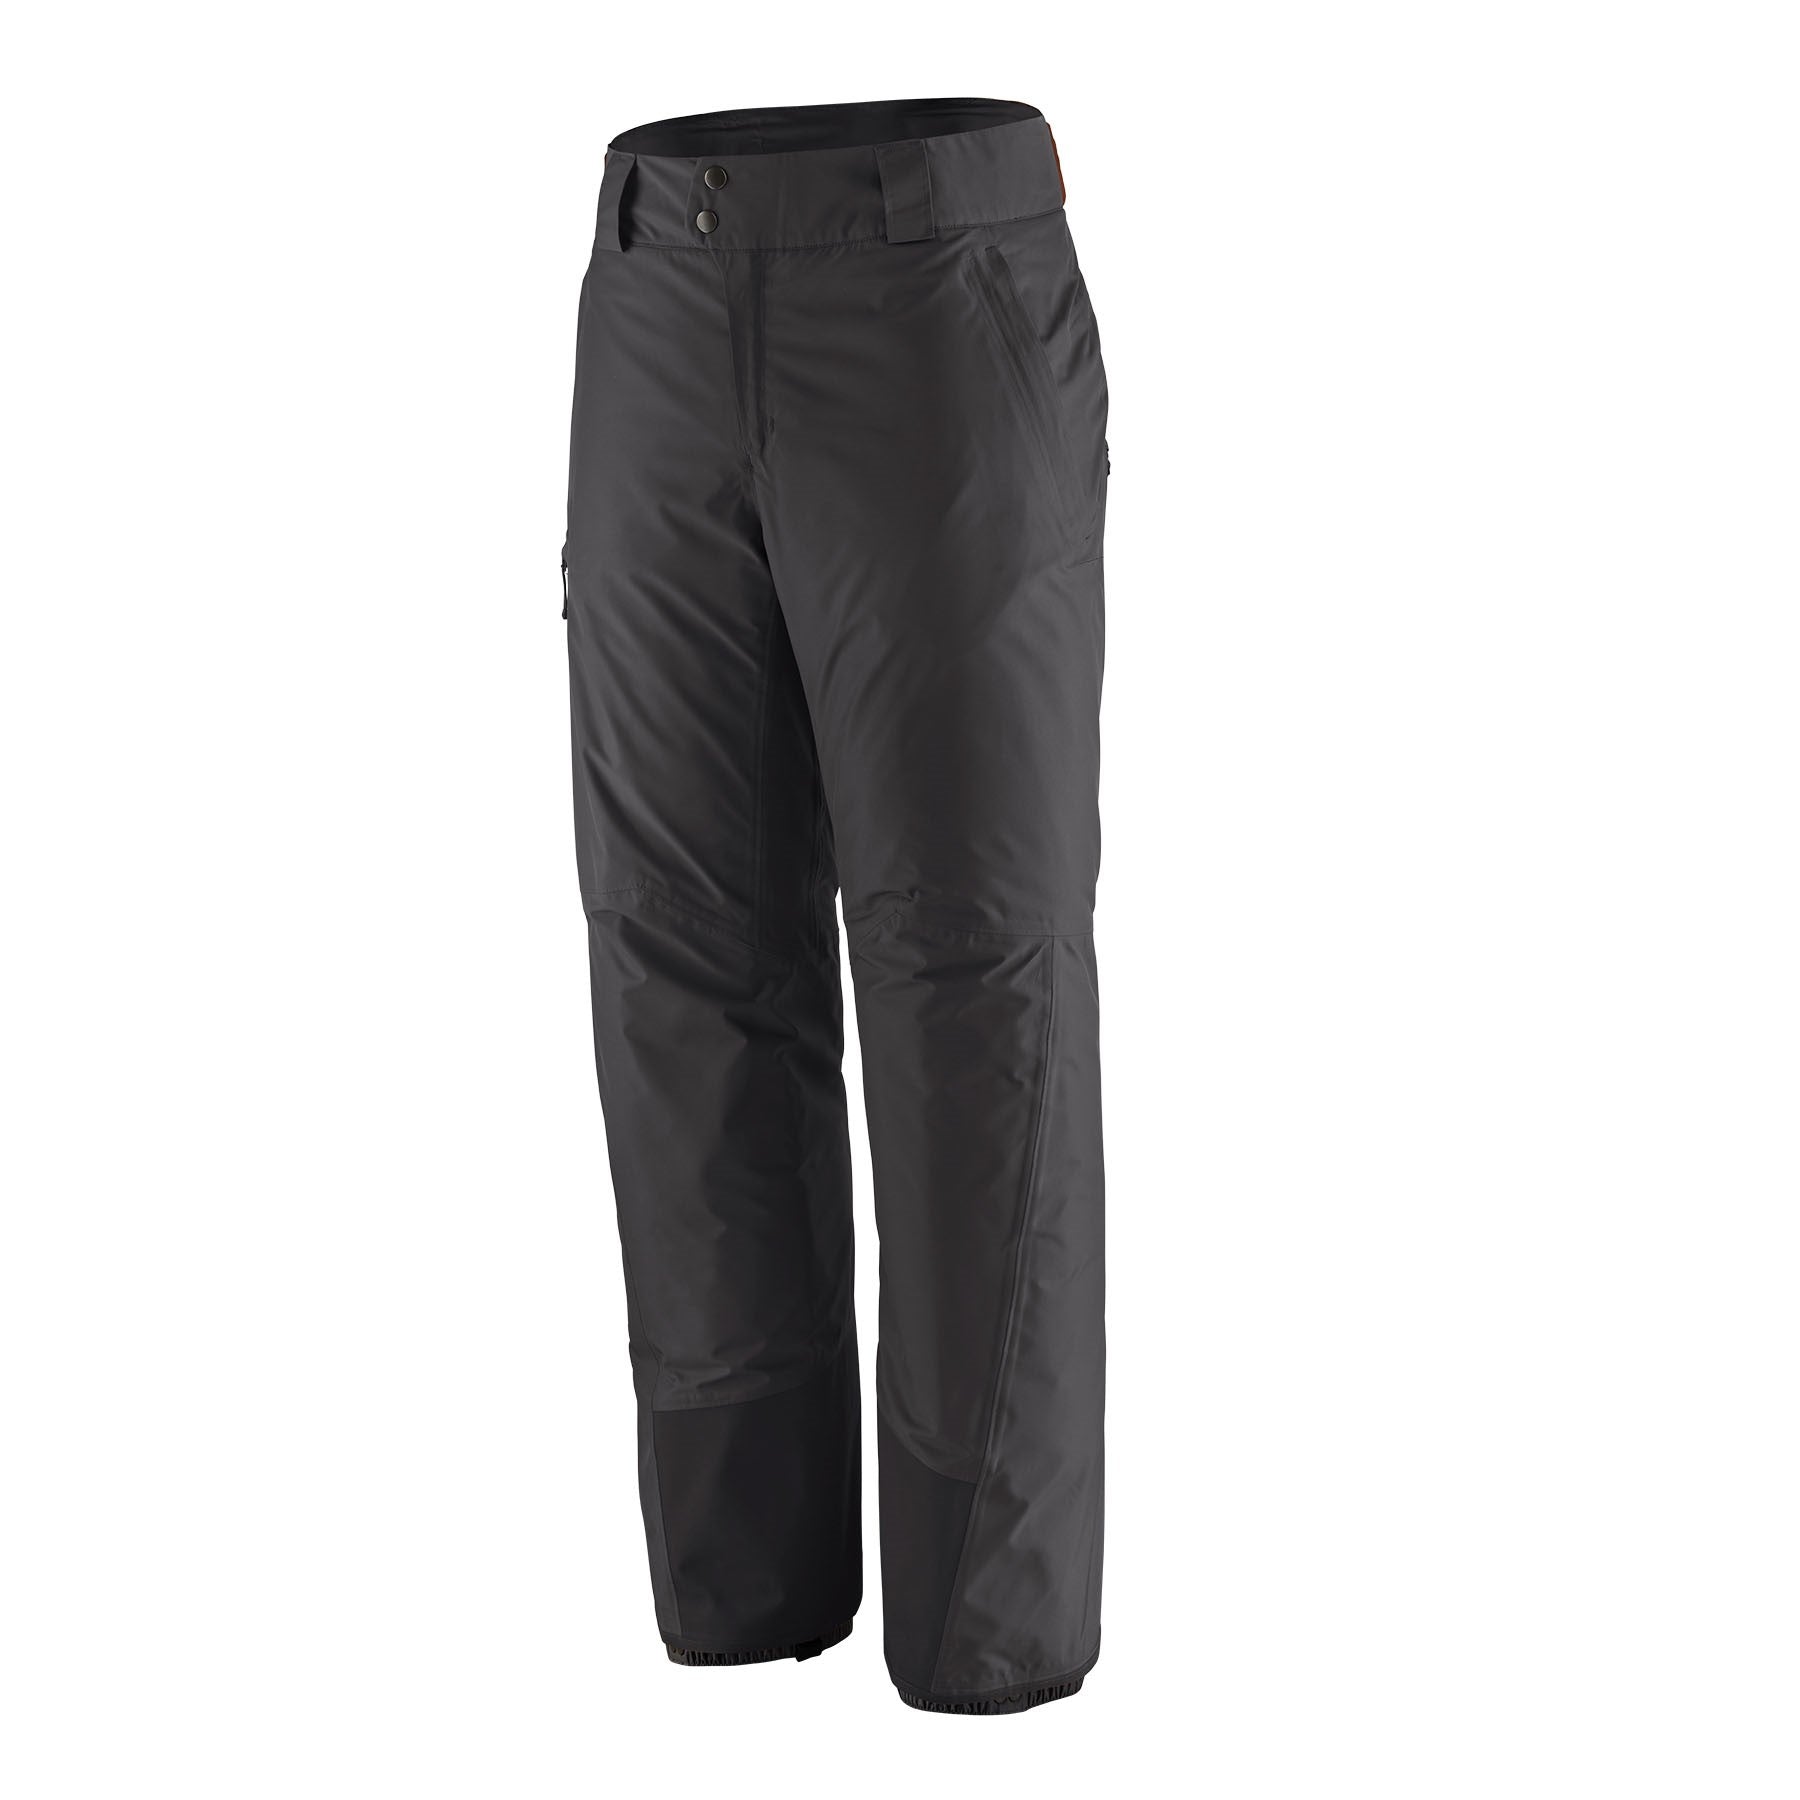 Insulated Powder Town Pants - Mens